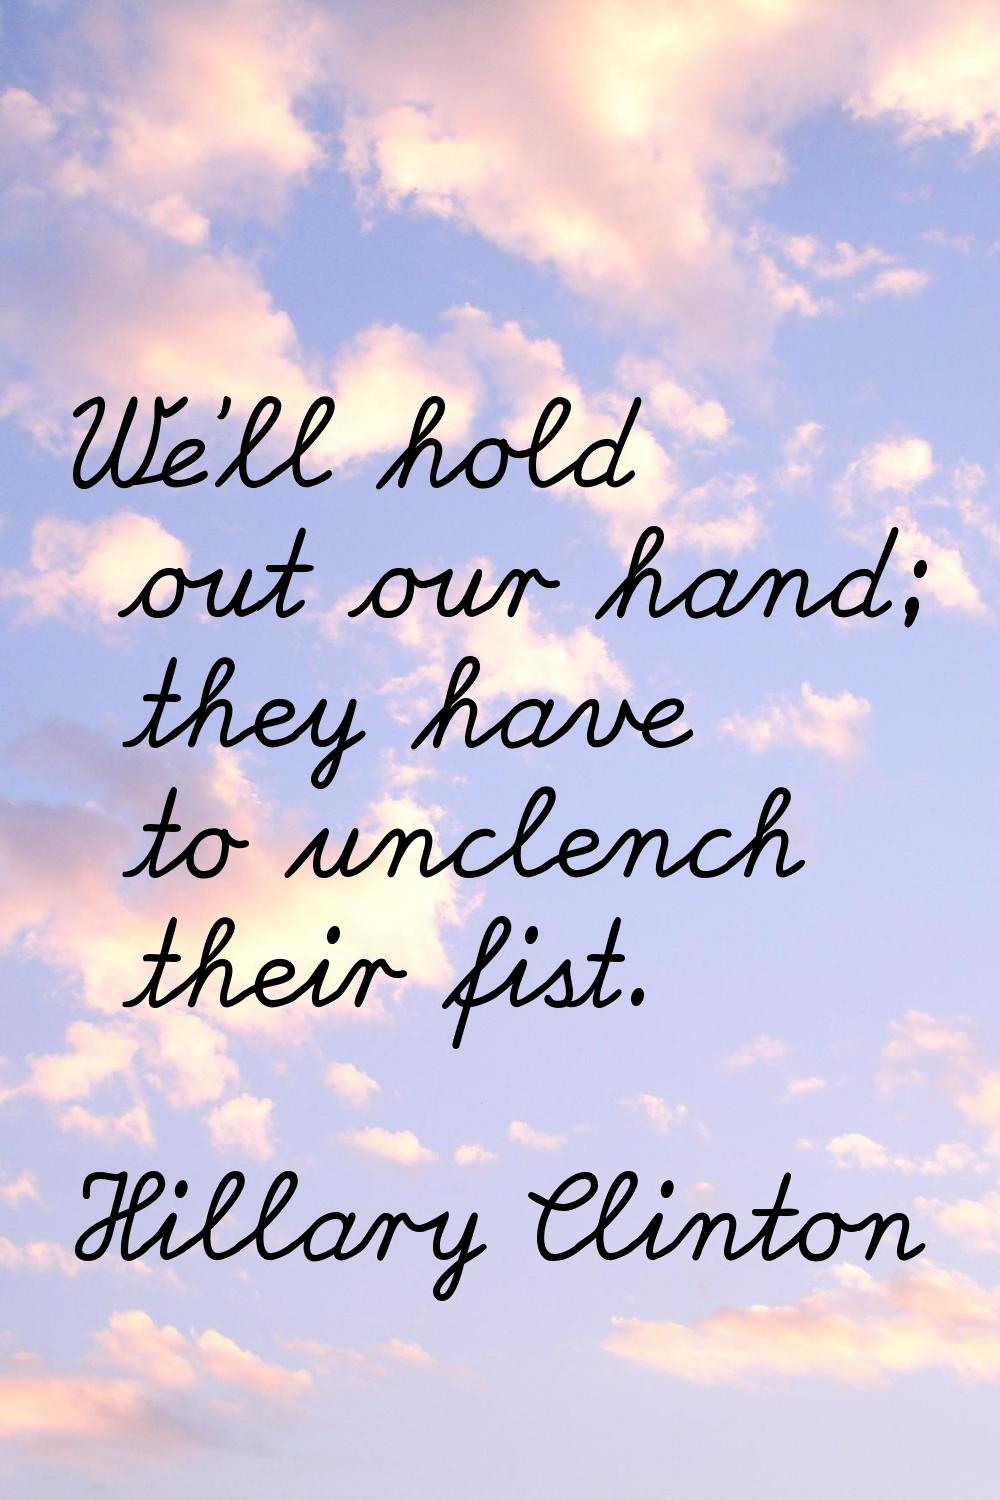 We'll hold out our hand; they have to unclench their fist.